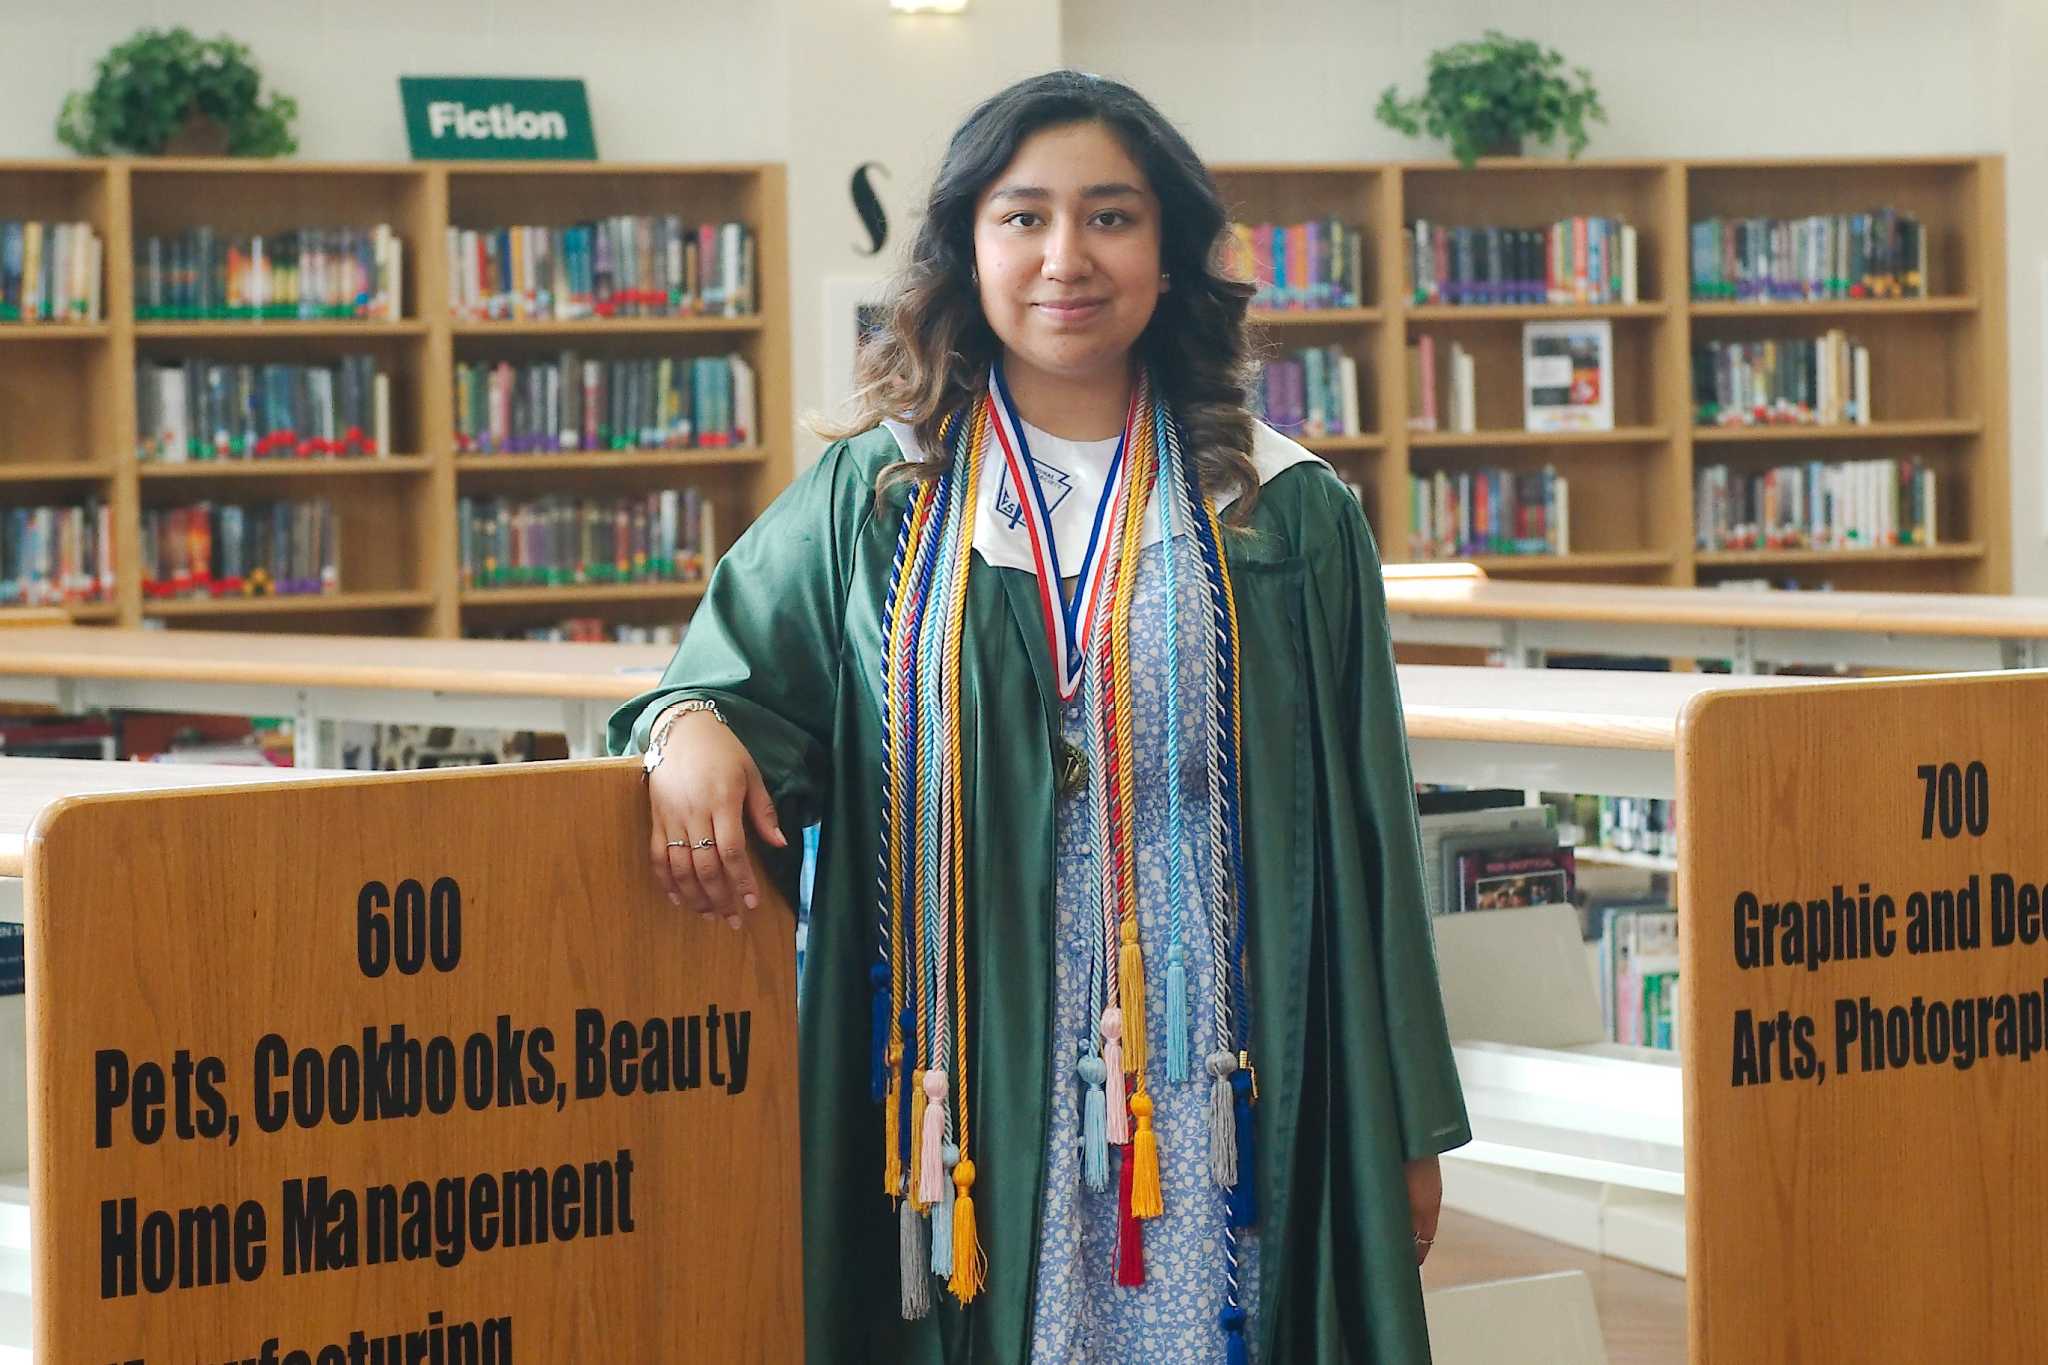 Daughter of immigrants: Graduation a triumph for family's sacrifices